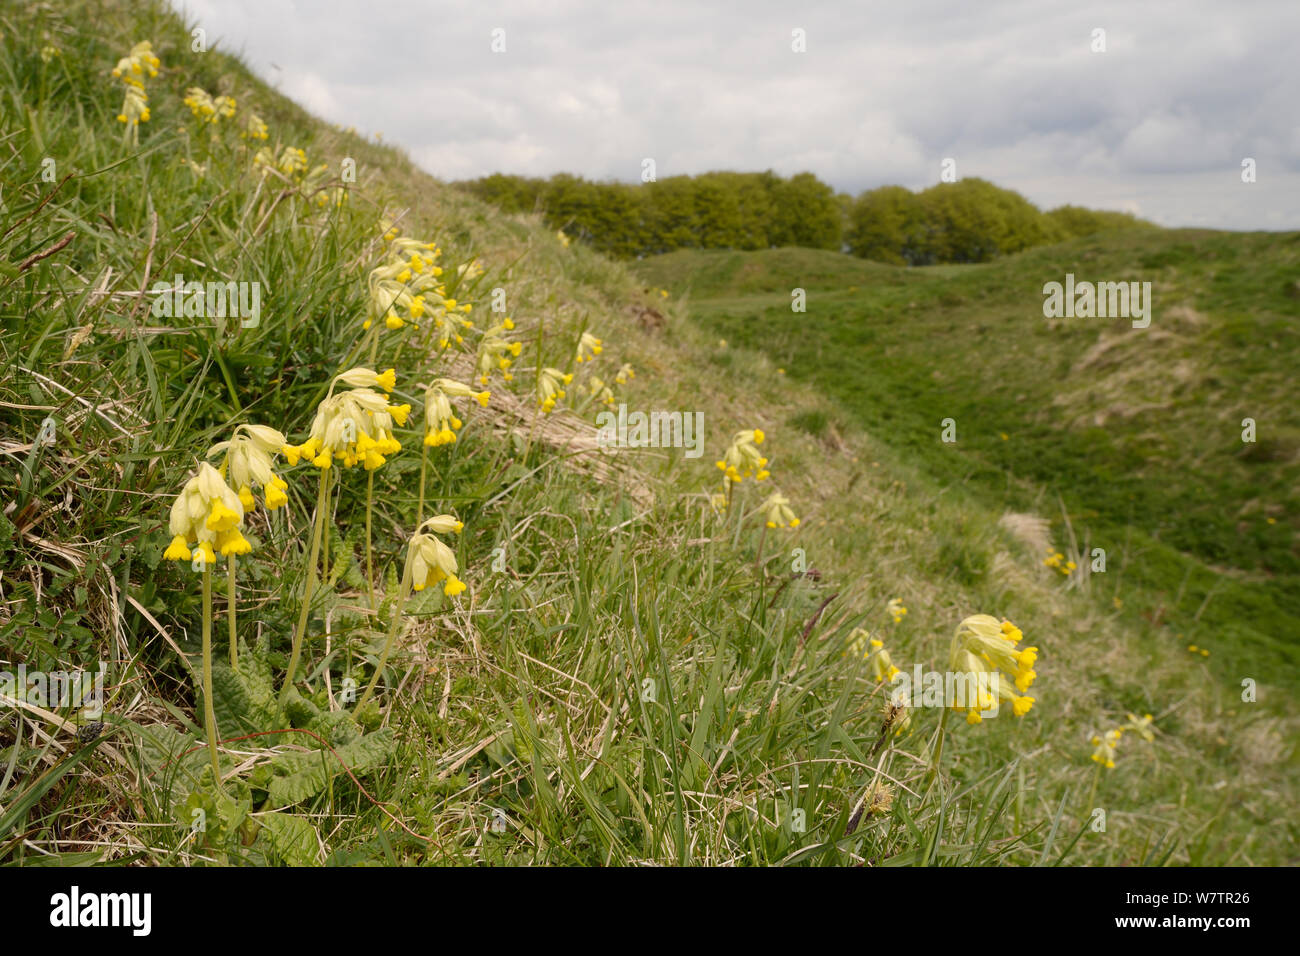 Cowslips (Primula veris) flowering on steep grassy ramparts of Barbury Castle Iron Age hill fort, Marlborough Downs, Wiltshire, UK, May. Stock Photo